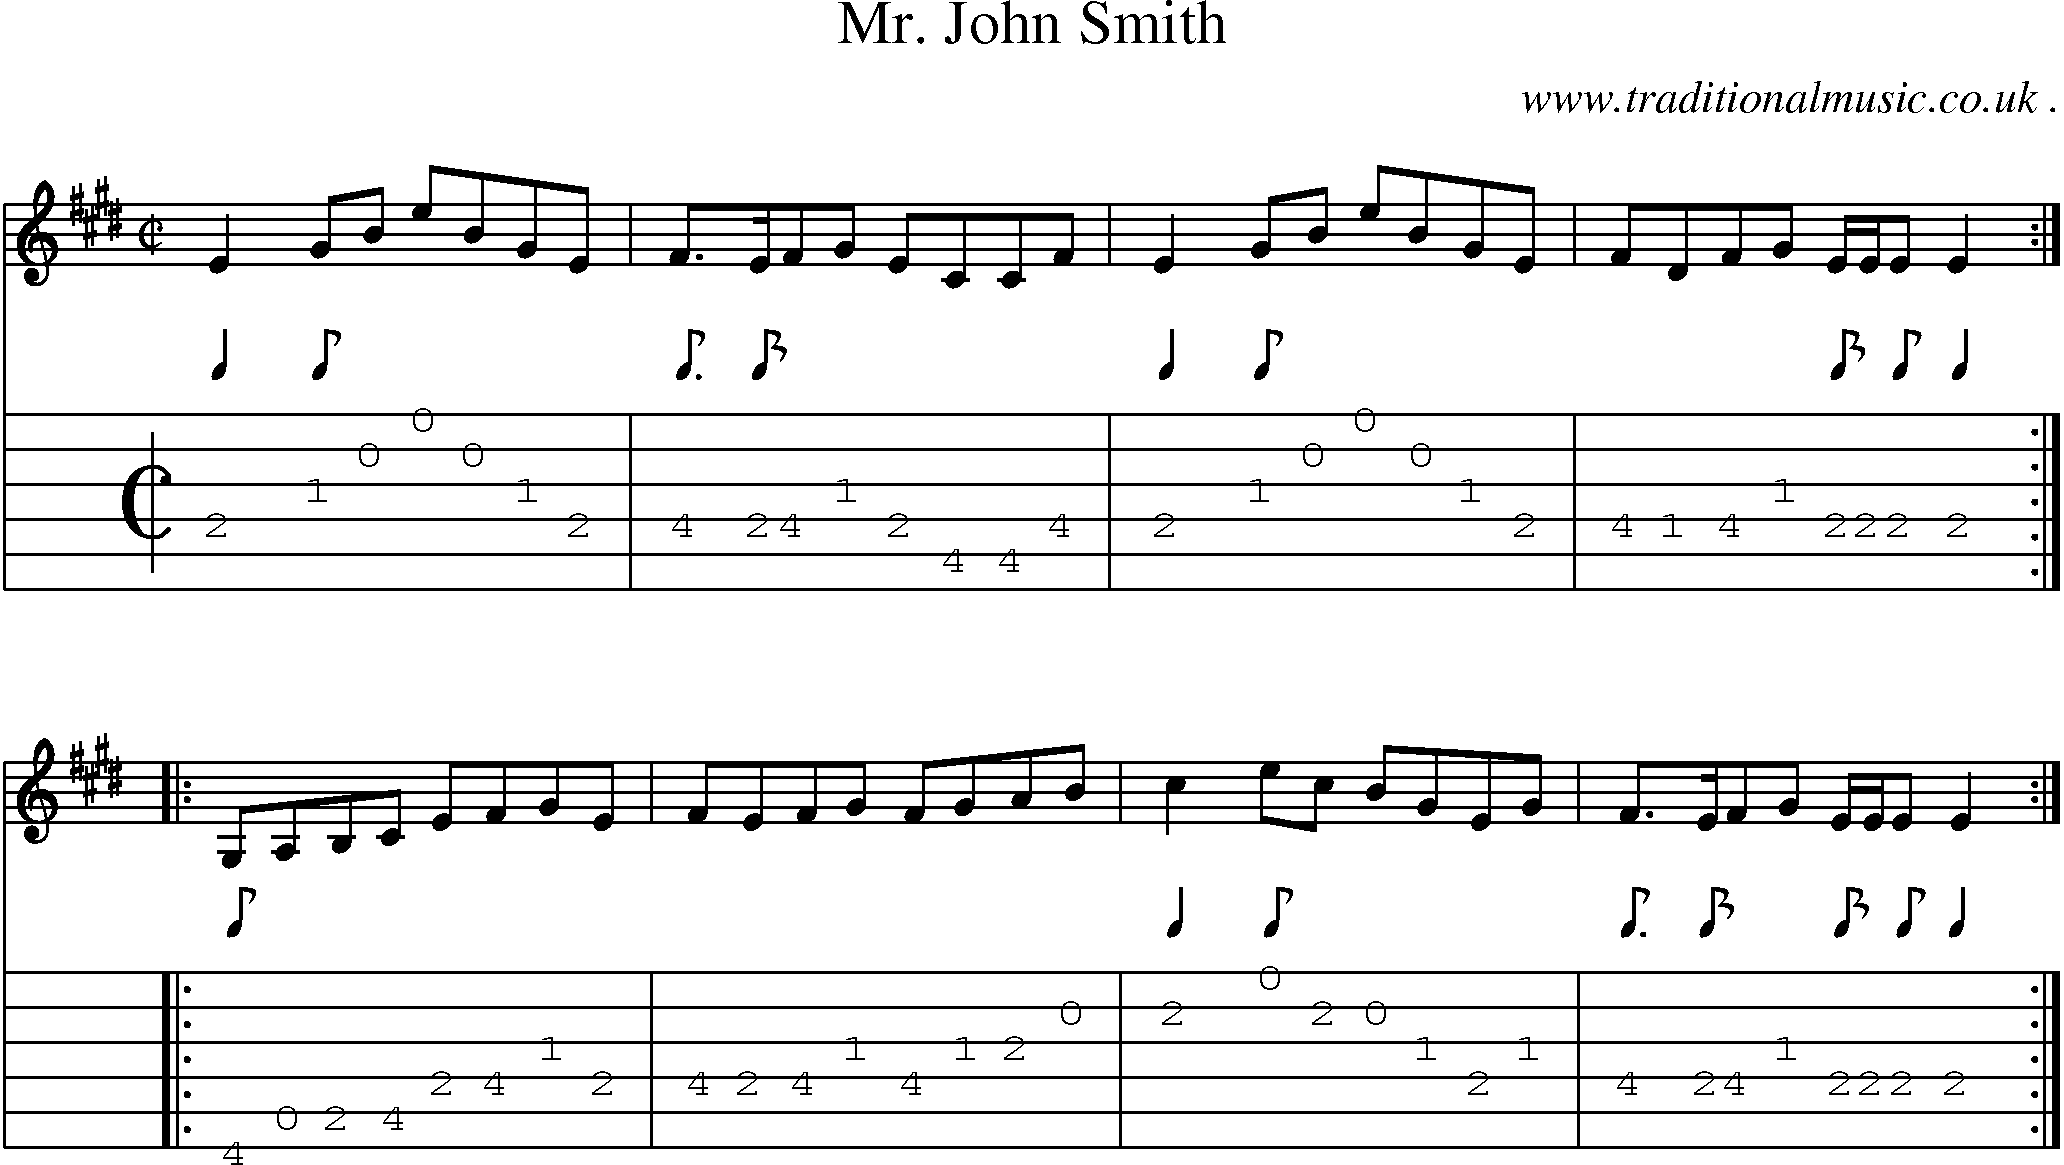 Sheet-music  score, Chords and Guitar Tabs for Mr John Smith